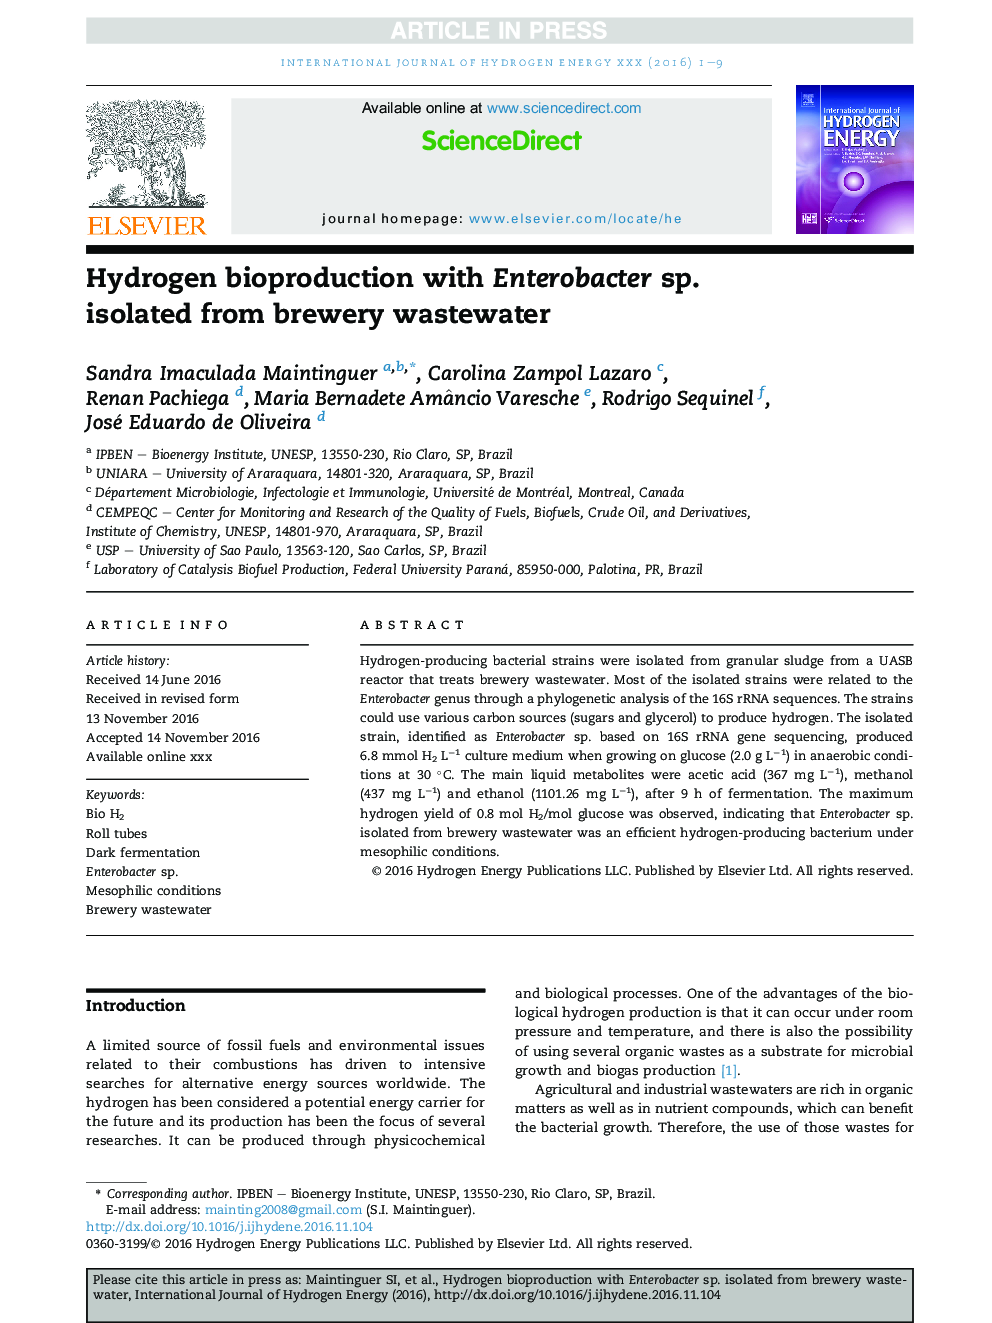 Hydrogen bioproduction with Enterobacter sp. isolated from brewery wastewater